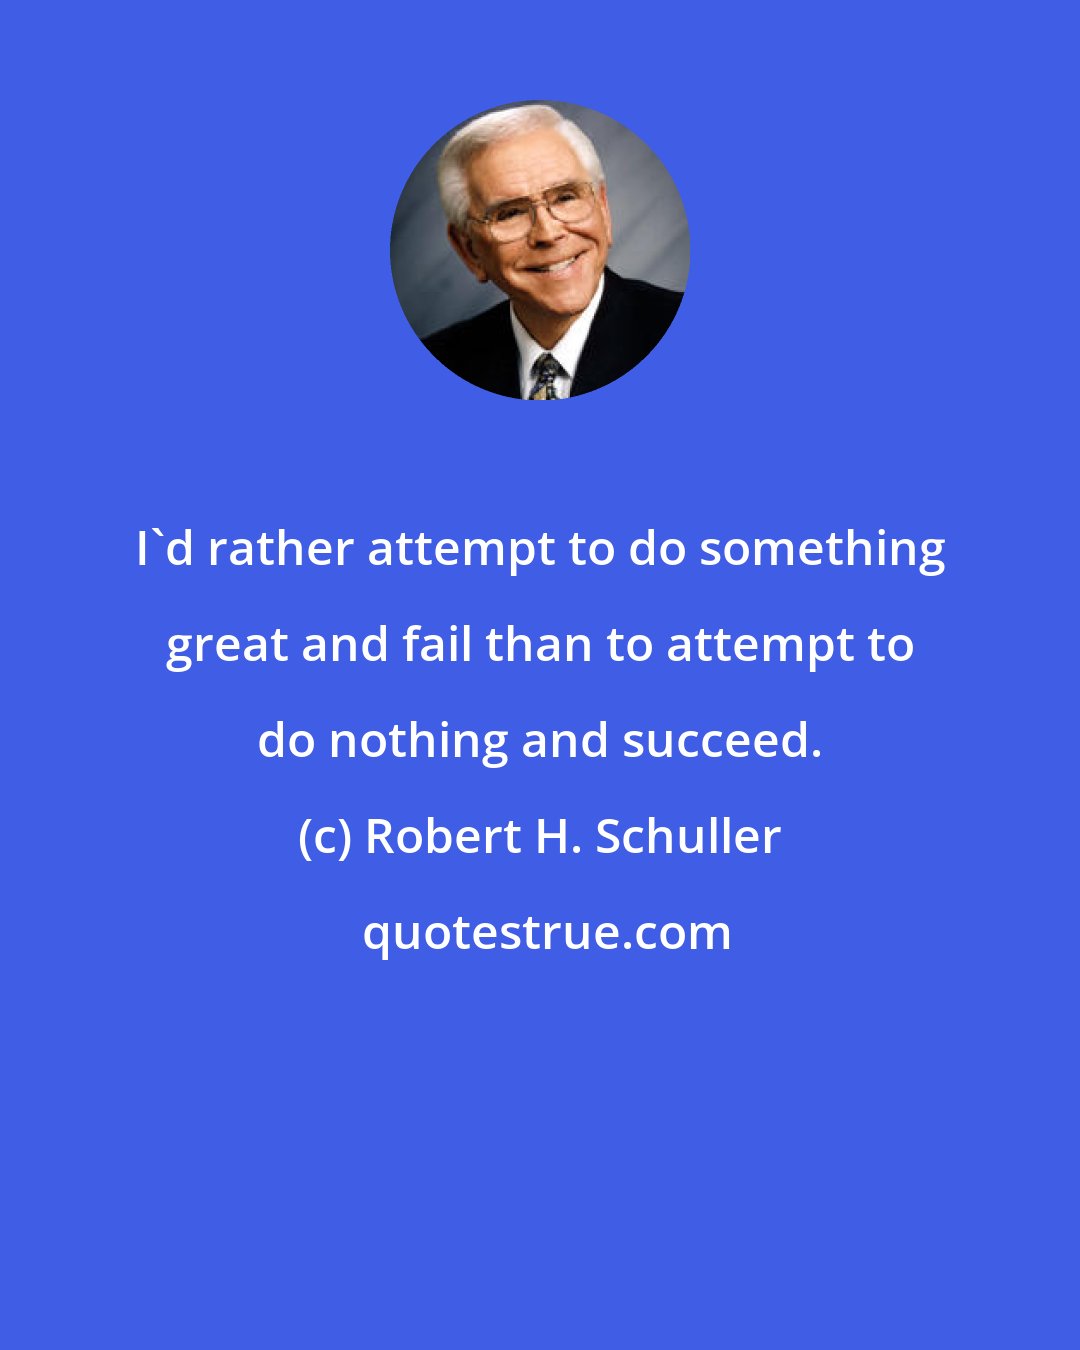 Robert H. Schuller: I'd rather attempt to do something great and fail than to attempt to do nothing and succeed.